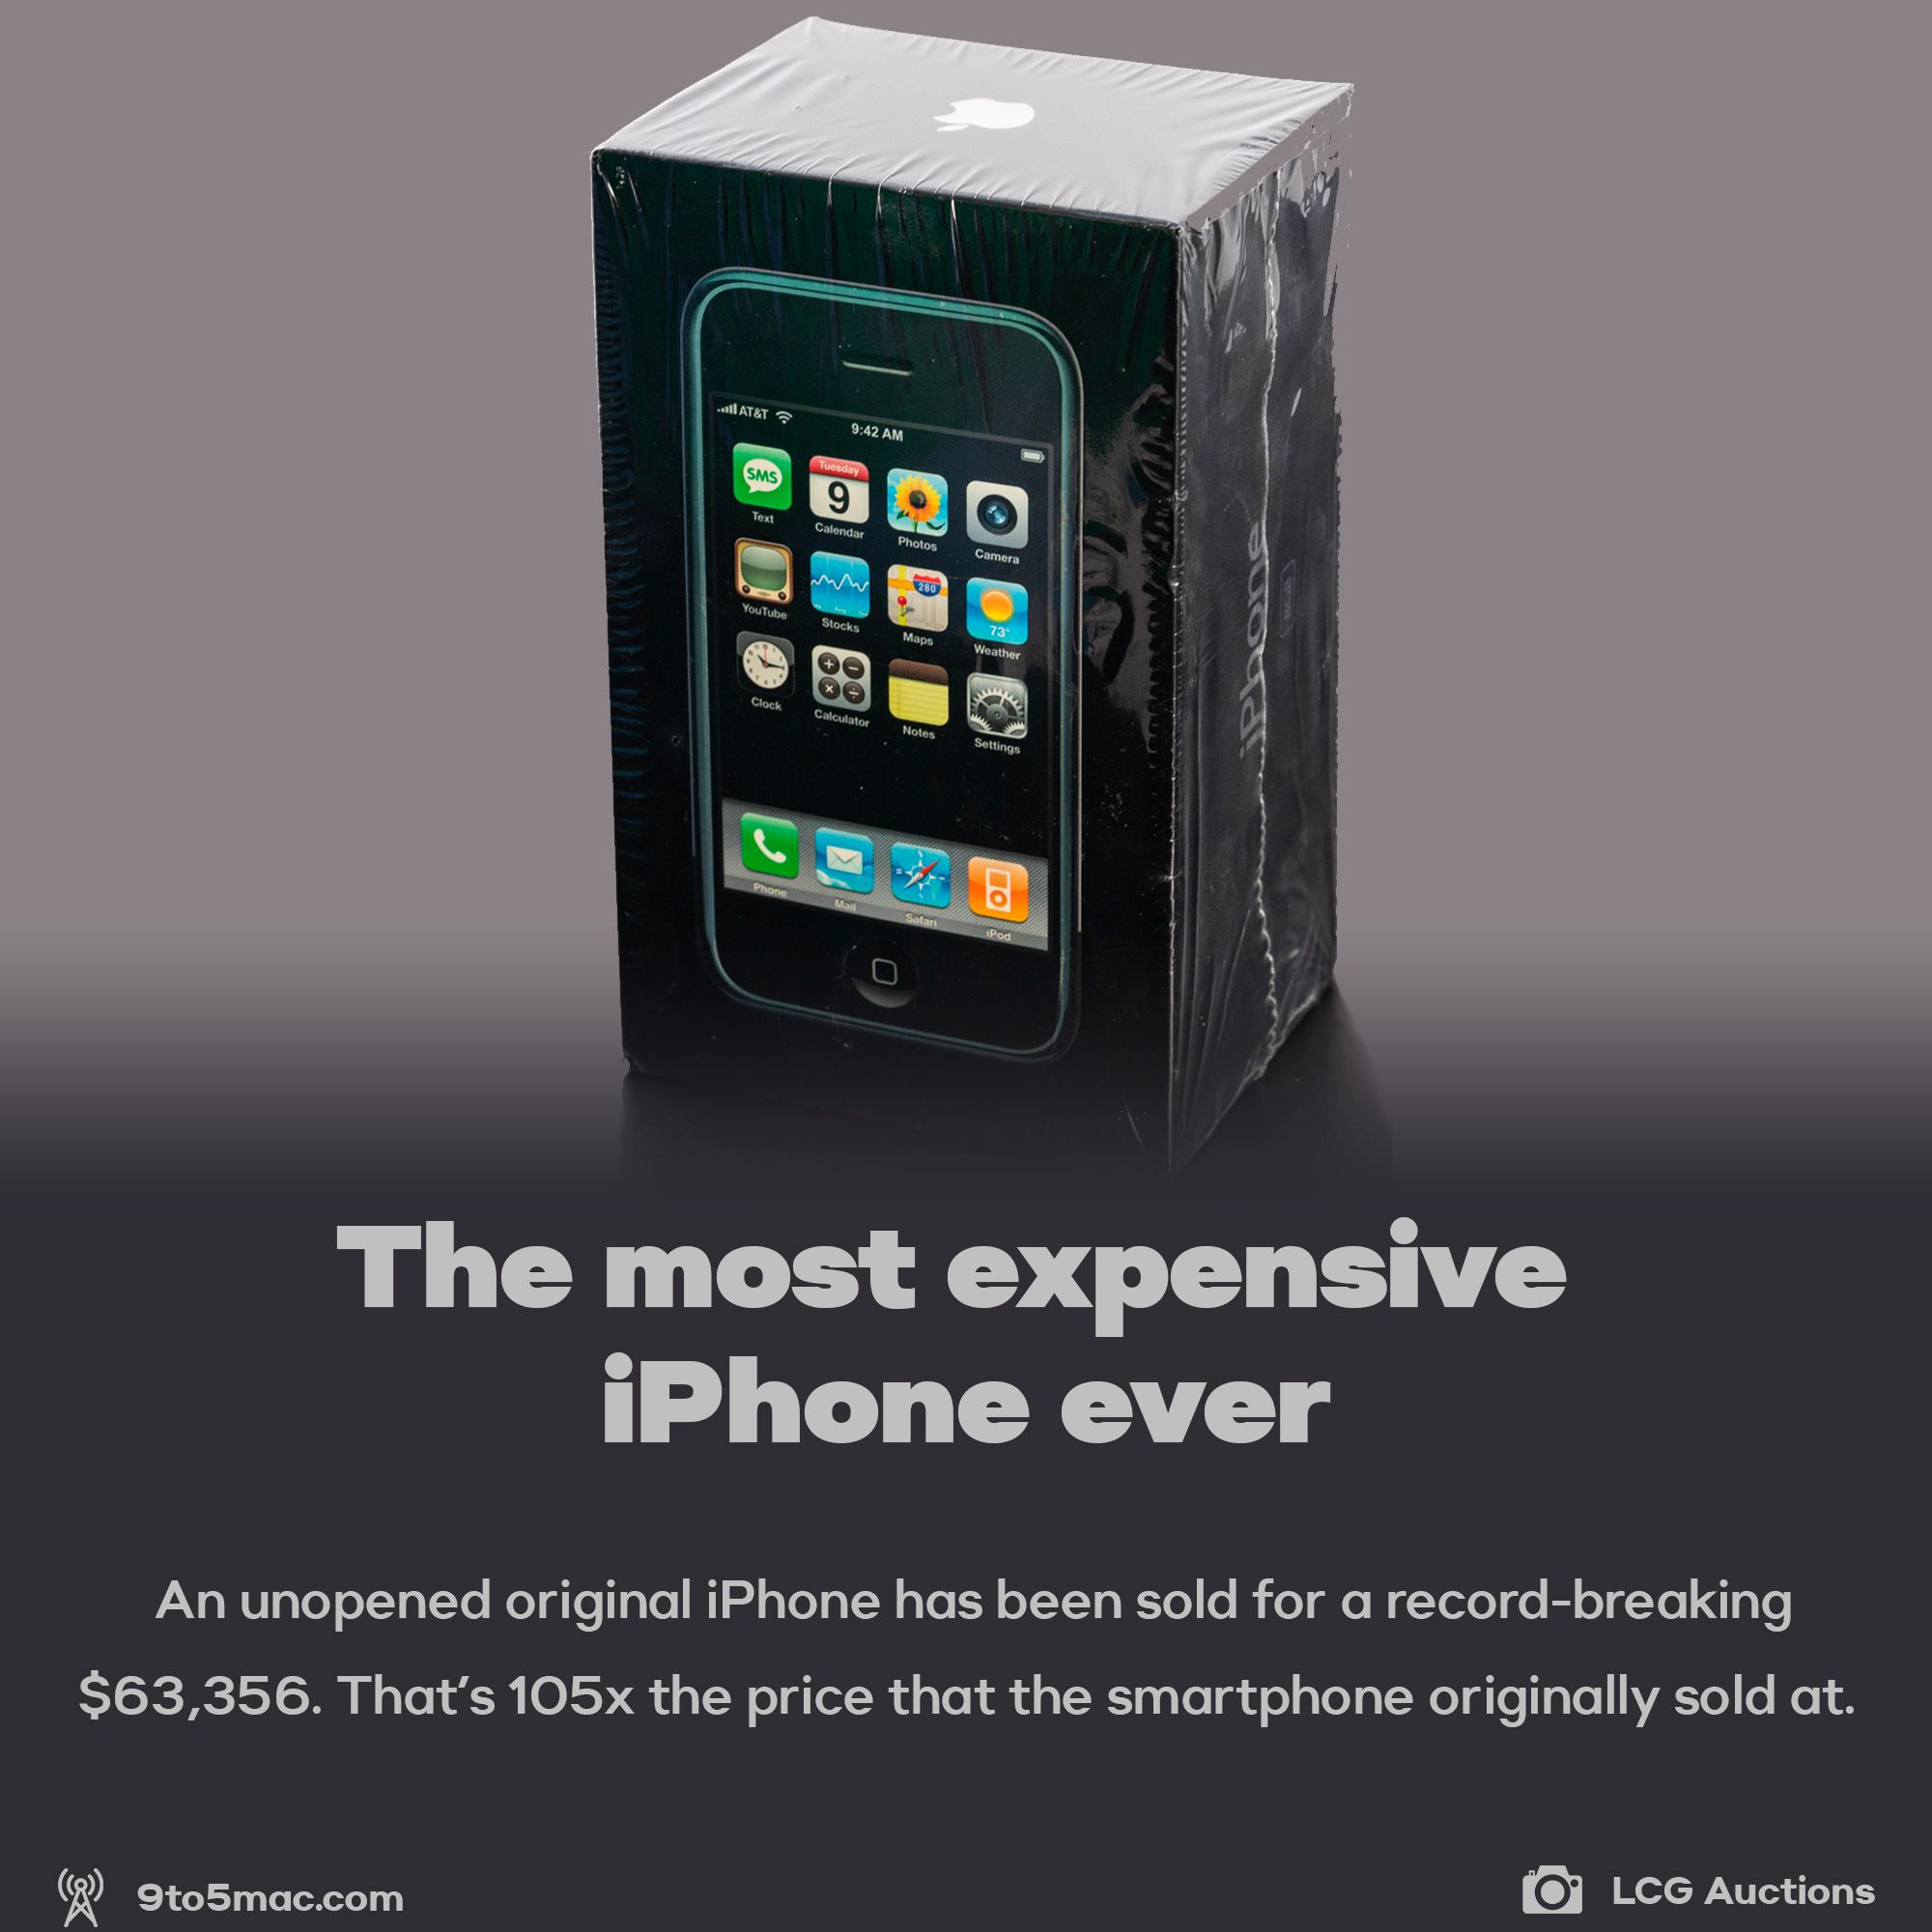 The original iPhone sold for over $63K